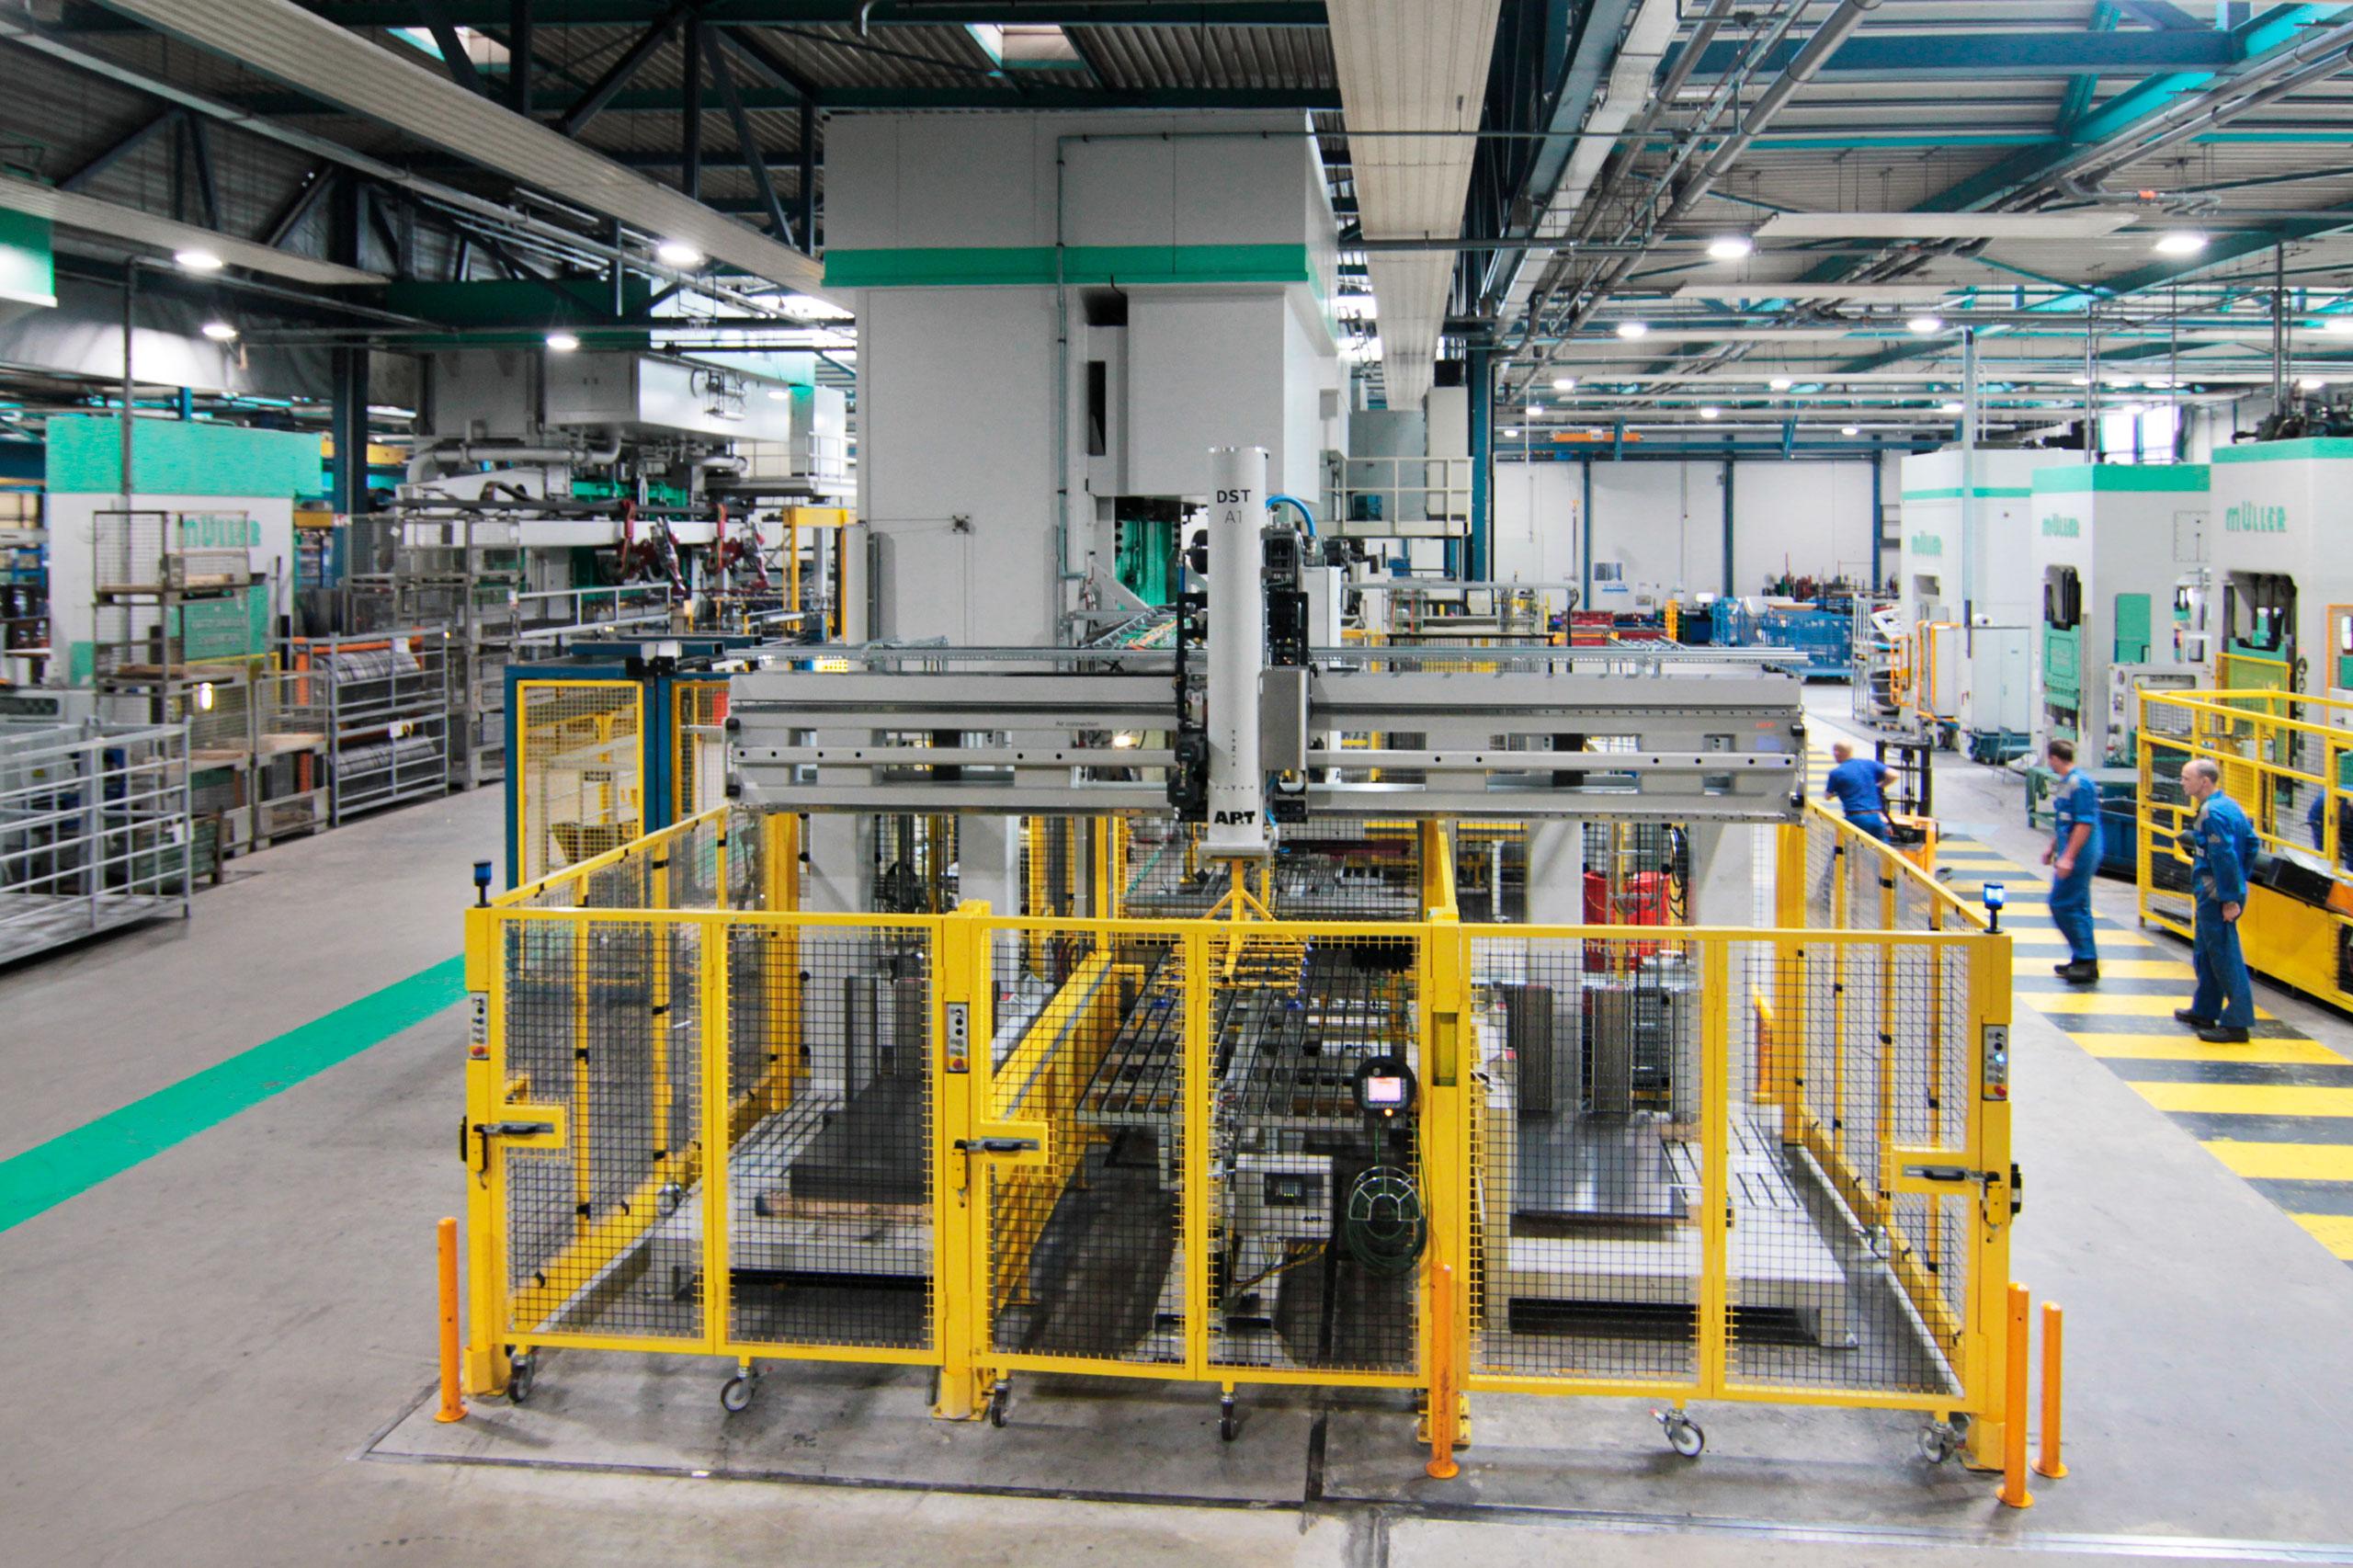 Witte van Moort is the first metal forming company in Europe to install a production solution that incorporates the new generation of automation products from AP&T.